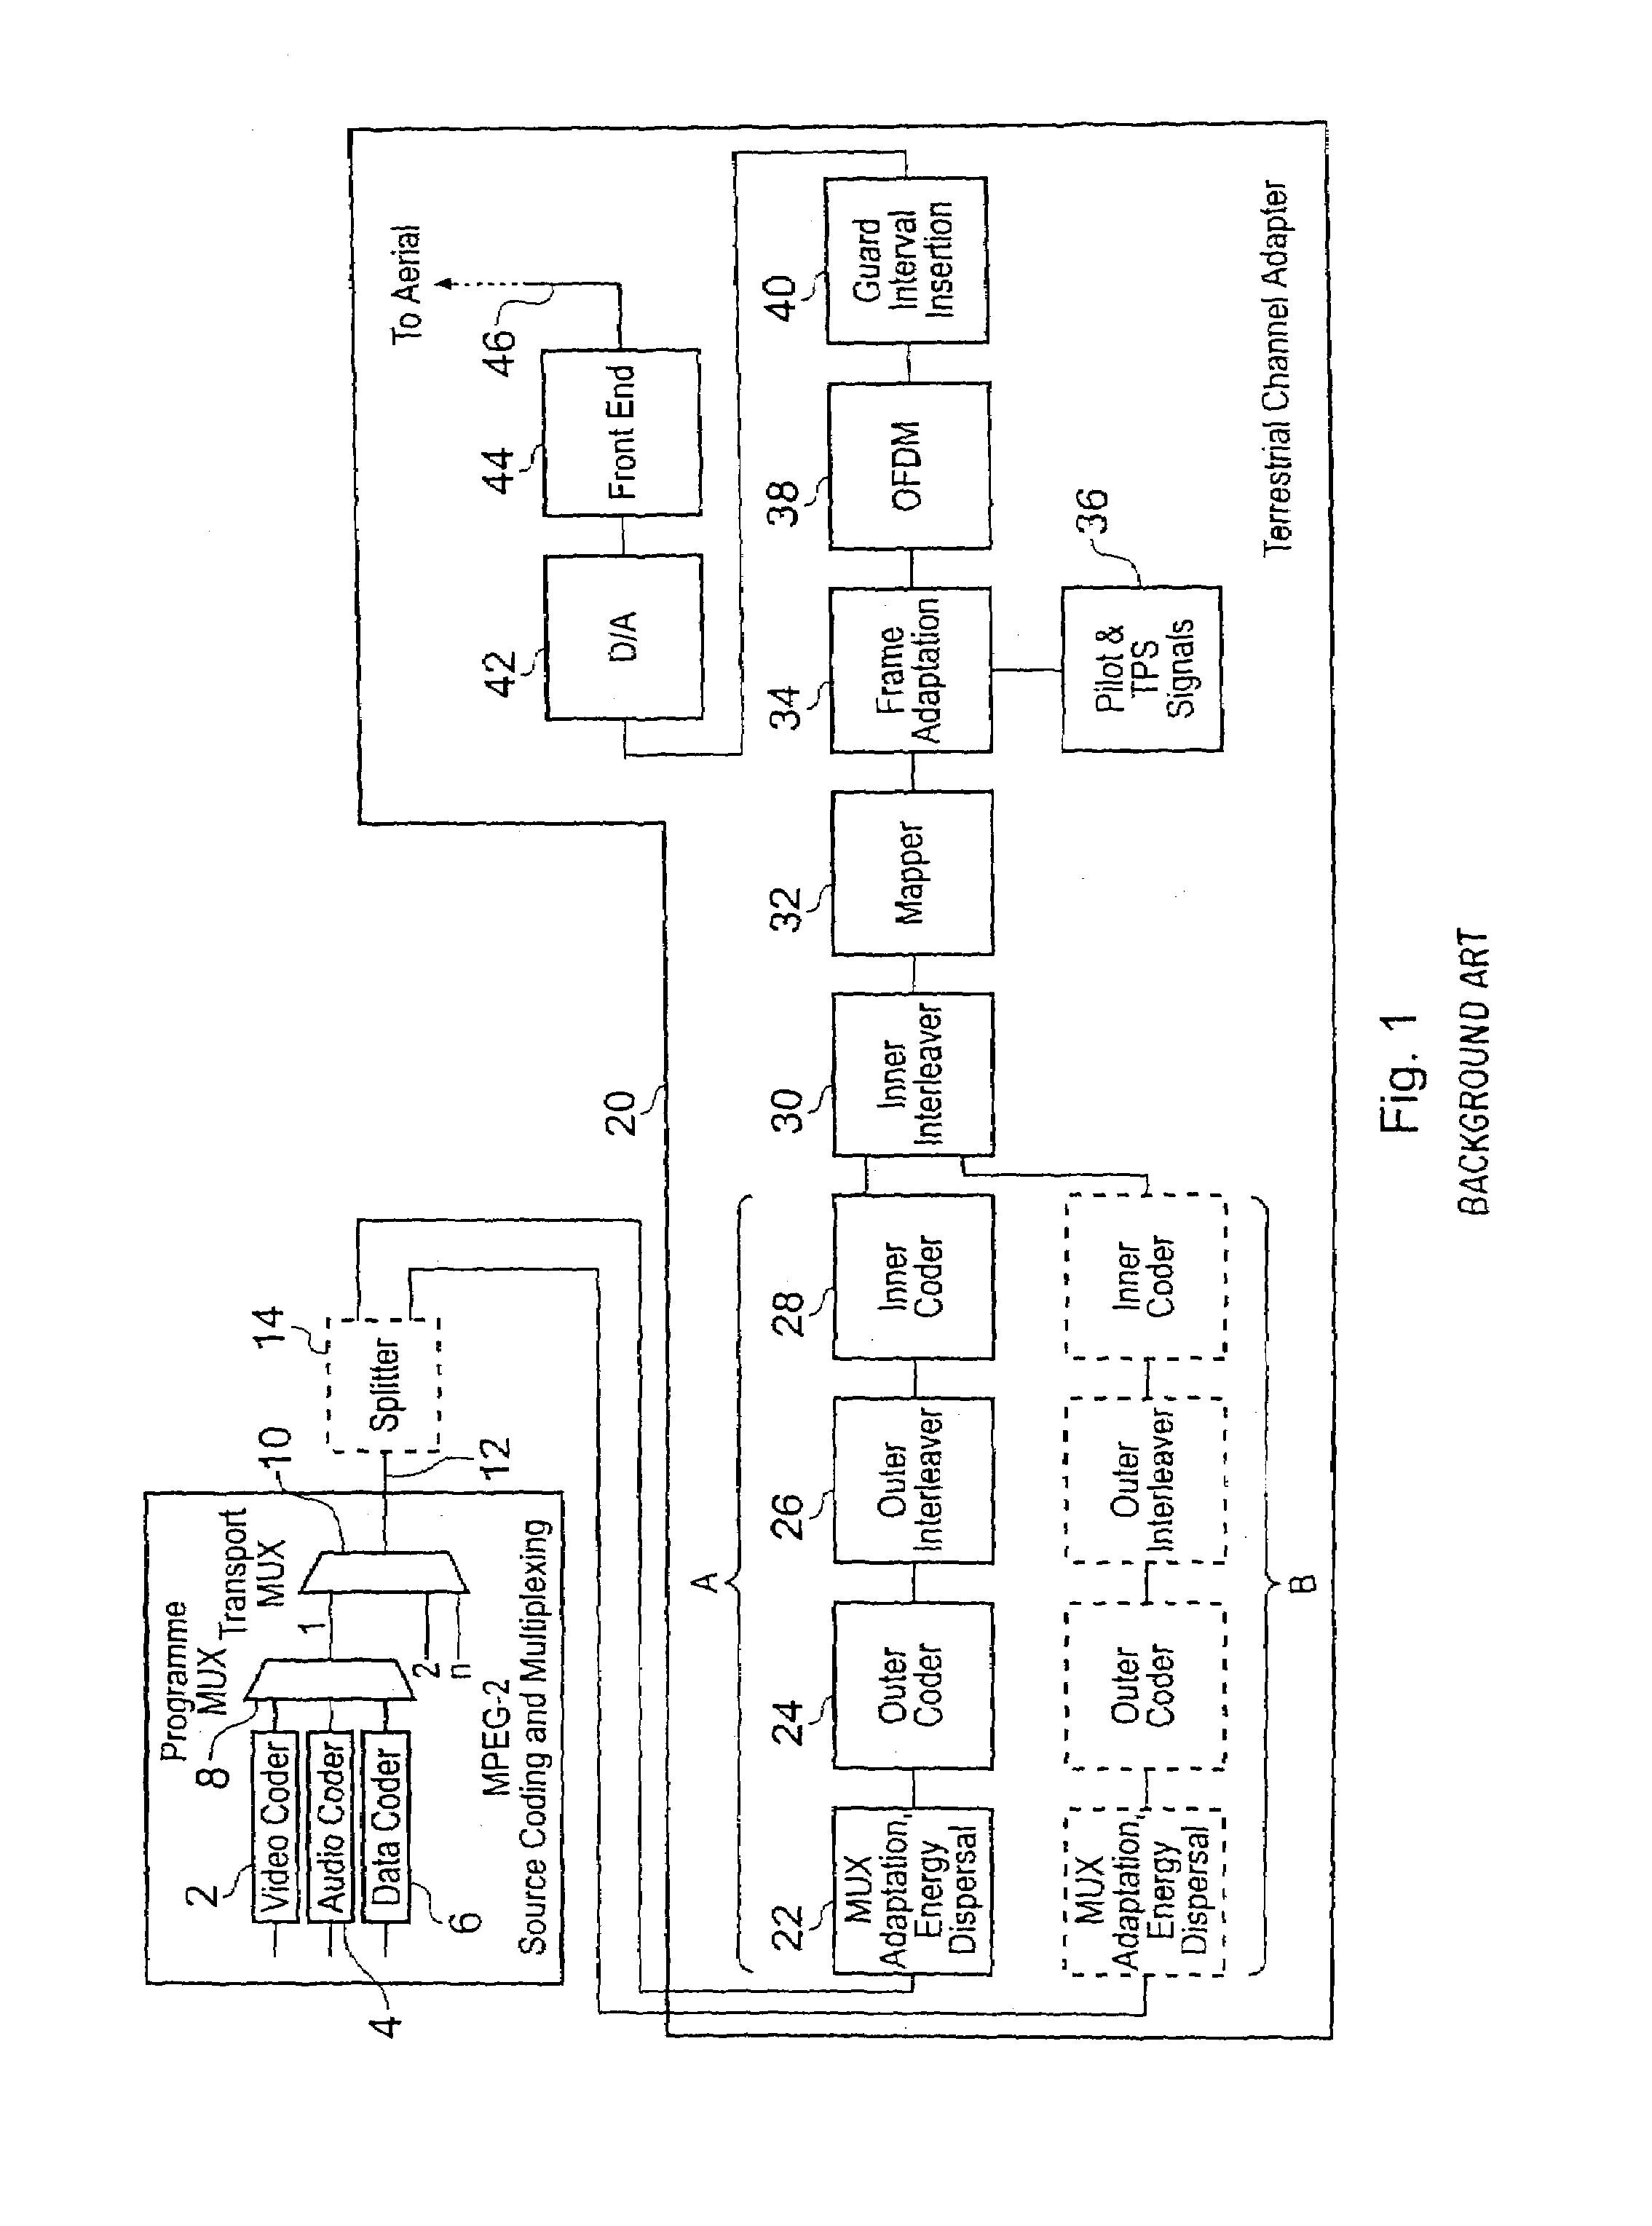 Data processing apparatus and method operable to map and de-map symbols and carrier signals of an Orthogonal Frequency Division Multiplexed (OFDM) symbol